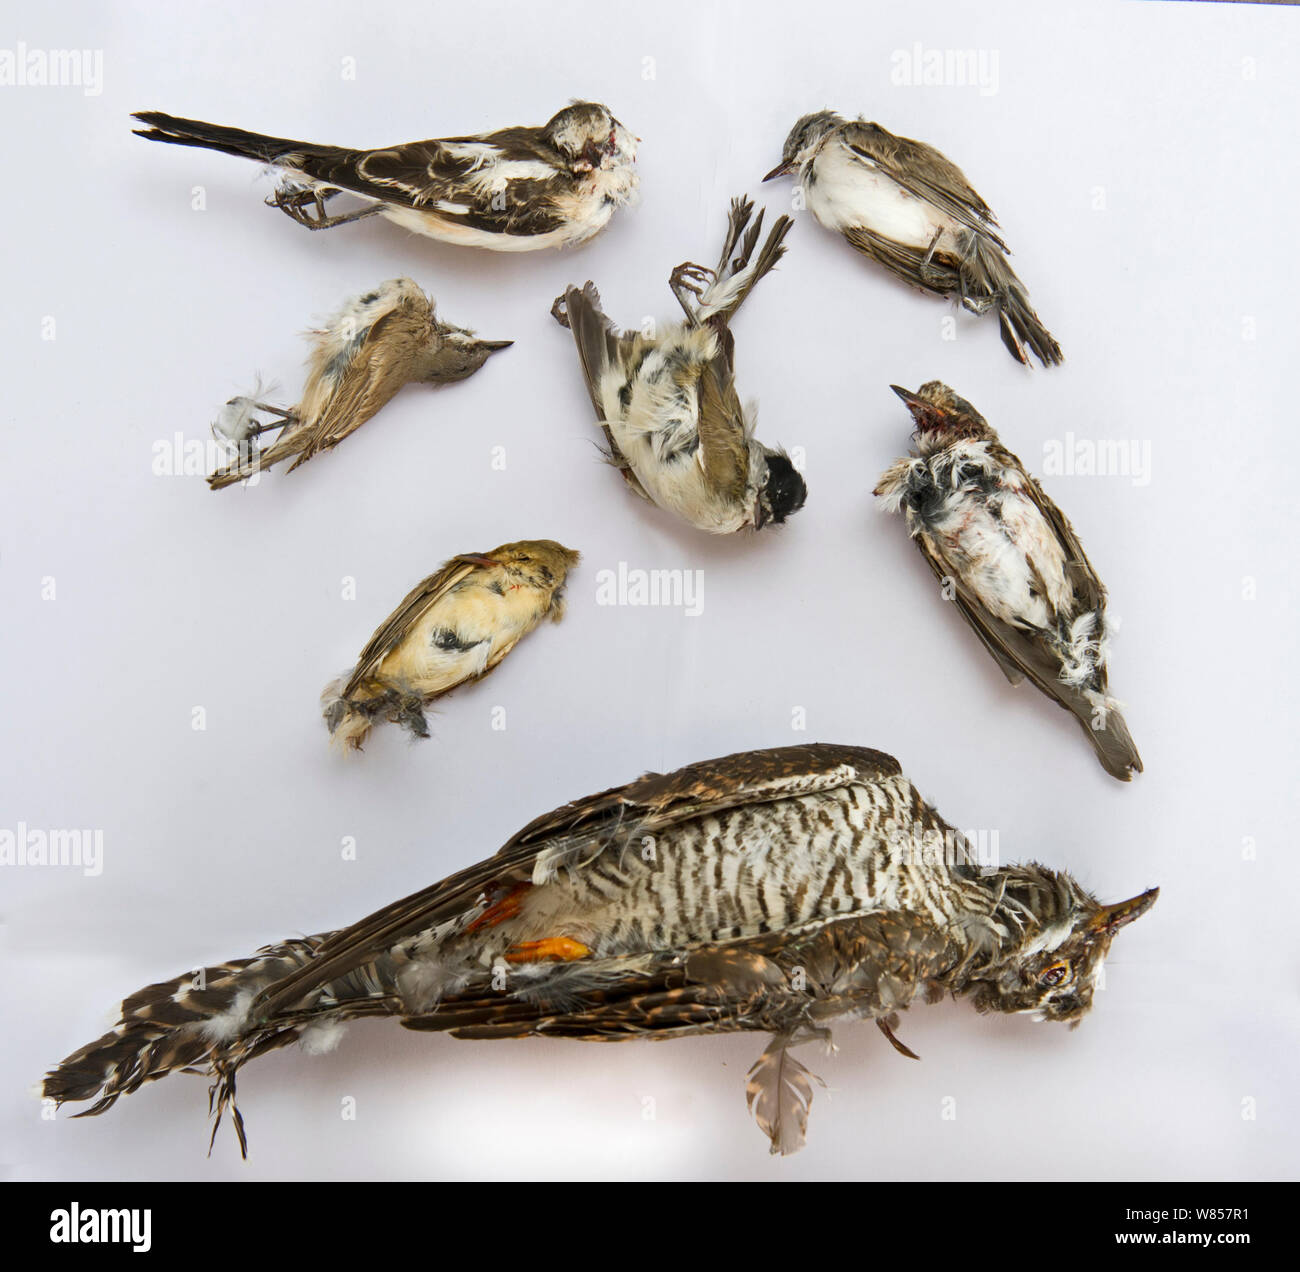 Seized dead birds from raid on illegal trapping operatuon by the Game Fund in Republic of Cyprus area, birds include Cuckoo (Cuculus canorus),  Blackcap (Sylvia atricapilla), Spotted Flycatcher (Muscicapa striata), Lesser Whitethroat (Sylvia curruca), Masked Shrike (Lanius nubicus) and Willow Warblers (Phylloscopus trochilus). They are trapped for a food delicacy known as ambelopoulia, Cyprus, September 2011 Stock Photo